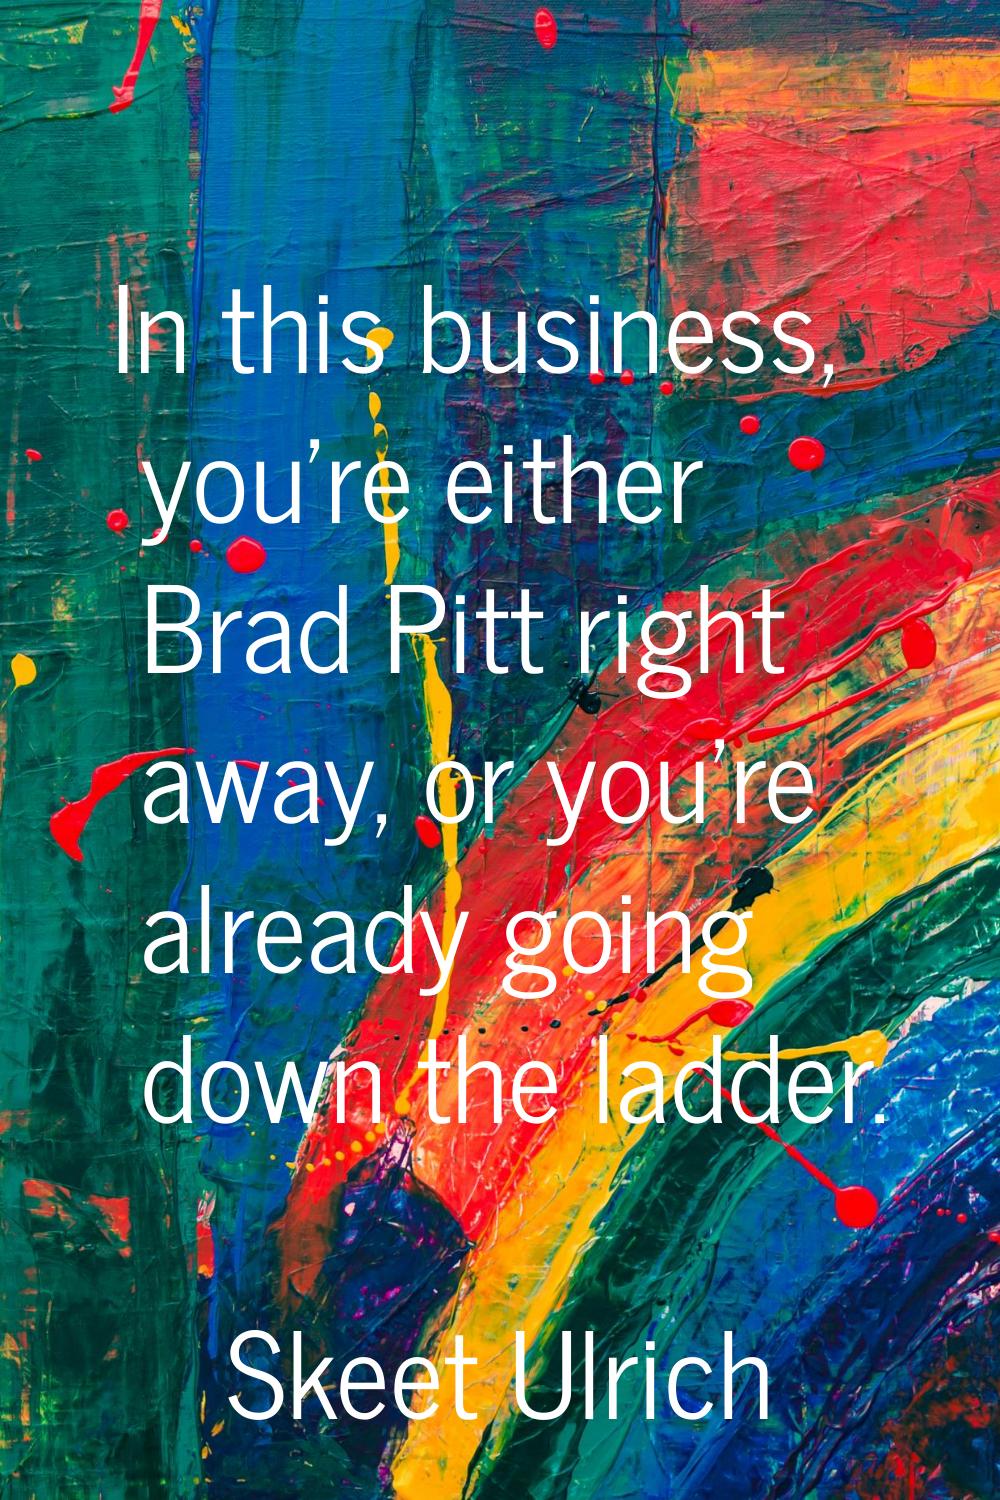 In this business, you're either Brad Pitt right away, or you're already going down the ladder.